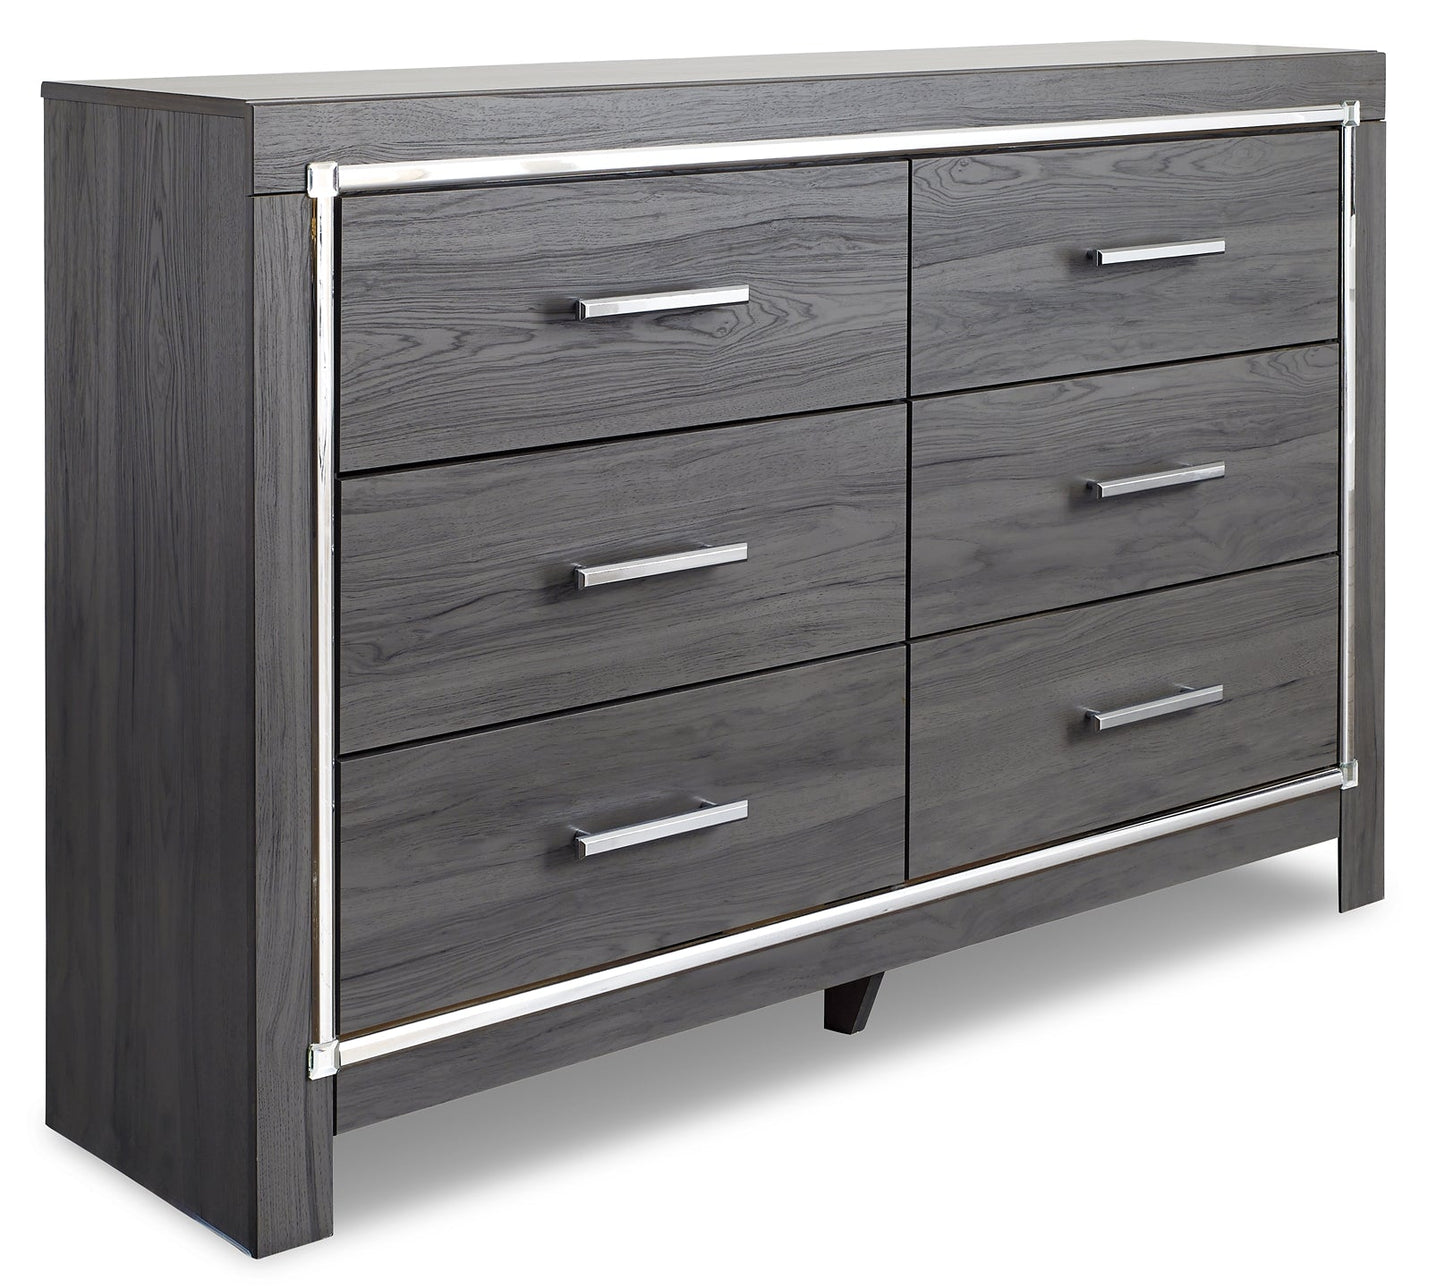 Lodanna King Panel Bed with 2 Storage Drawers with Dresser at Towne & Country Furniture (AL) furniture, home furniture, home decor, sofa, bedding